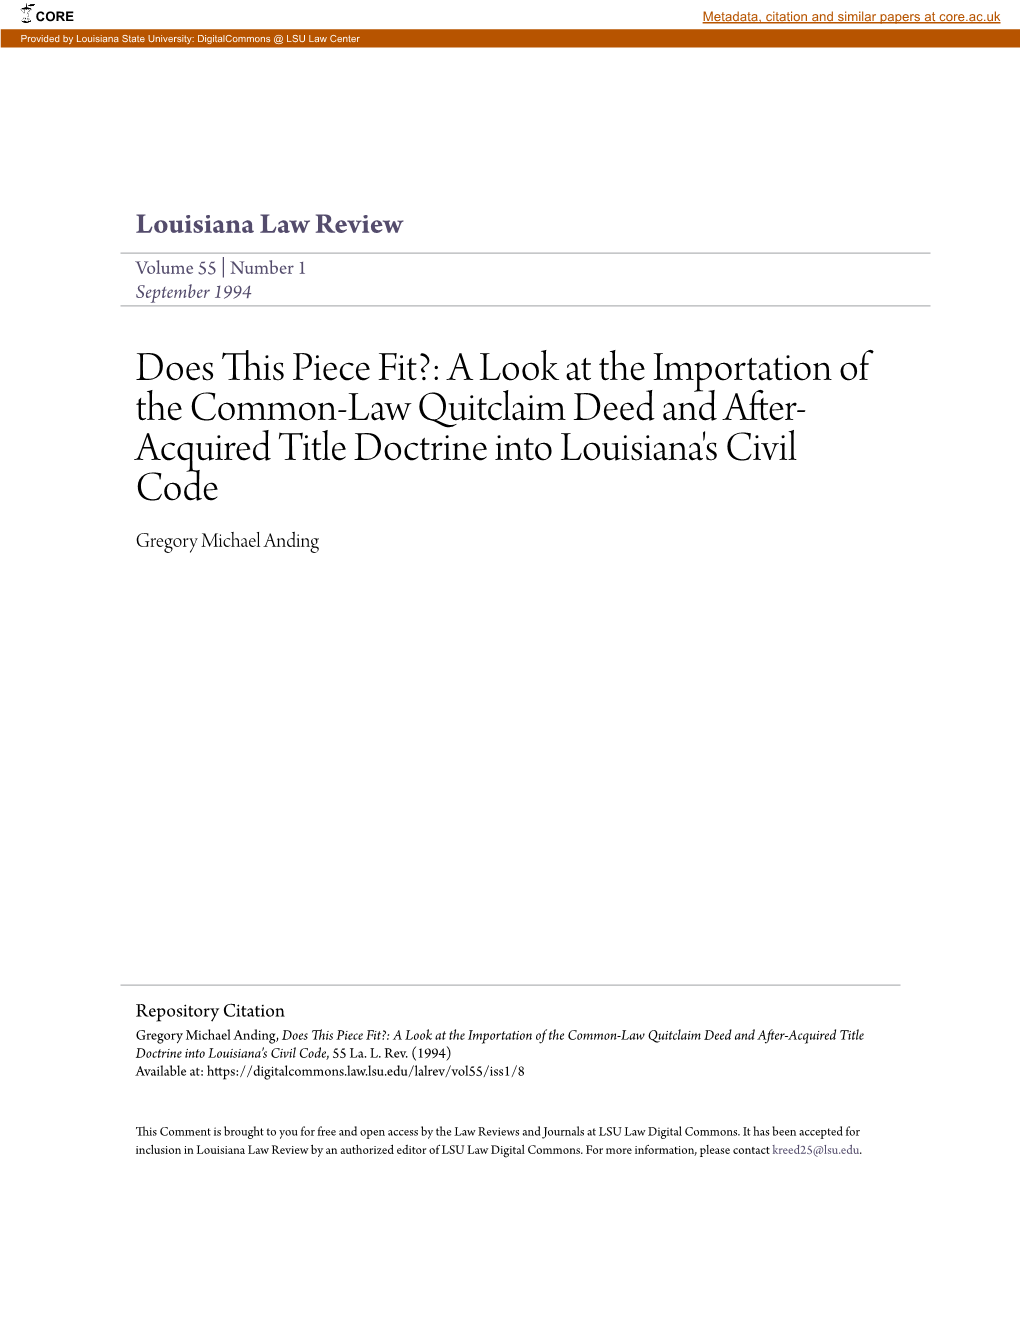 A Look at the Importation of the Common-Law Quitclaim Deed and After- Acquired Title Doctrine Into Louisiana's Civil Code Gregory Michael Anding